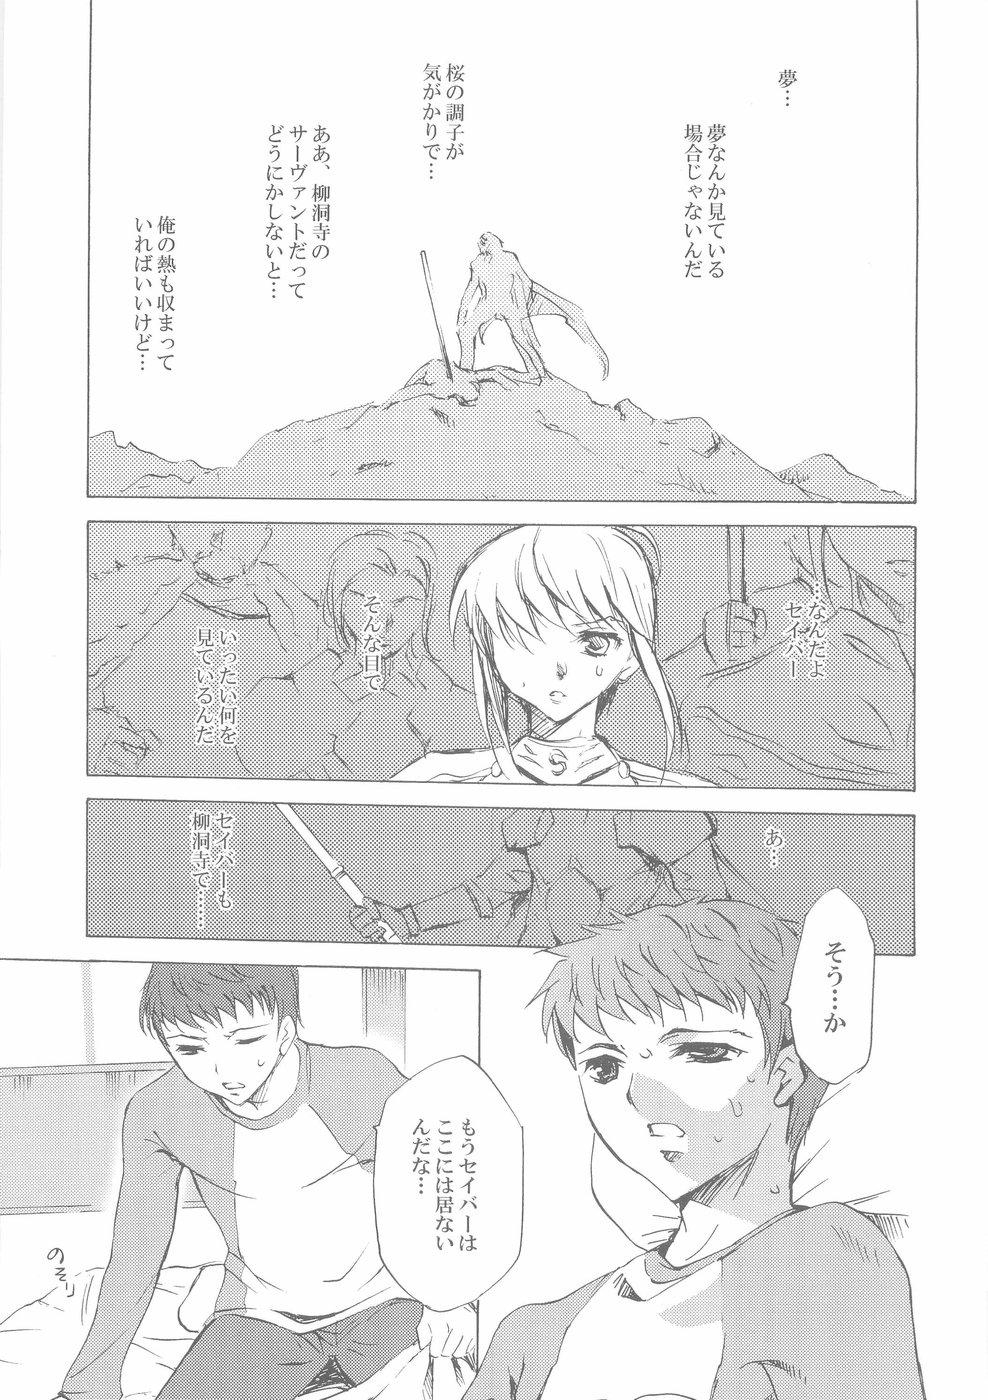 Handjob Face II stay with my love - Fate stay night Time - Page 2